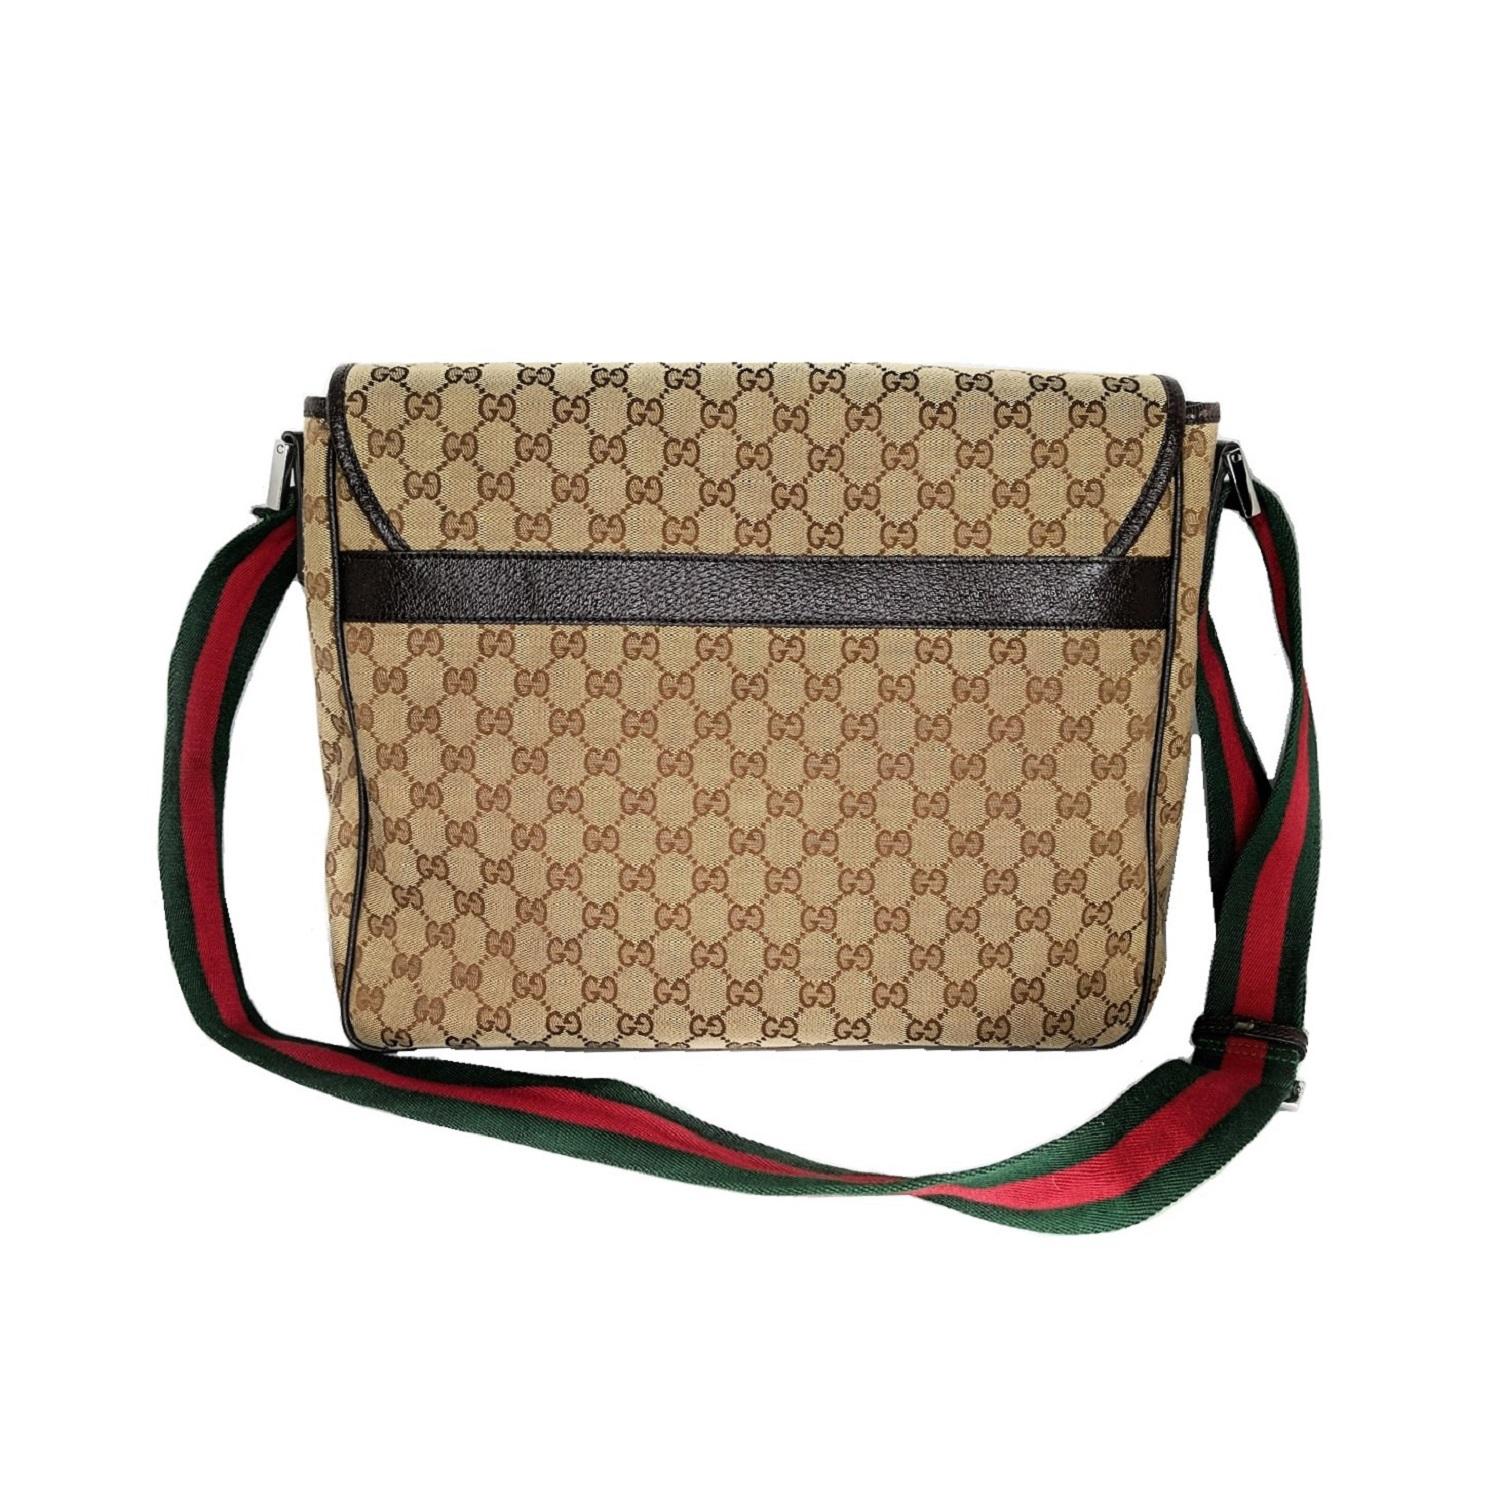 This stylish messenger bag is crafted of ebony on beige monogram canvas. It features a red and green striped nylon cross-body strap, gunmetal hardware, and dark brown leather trim. The flap opens to a brown fabric interior with zipper and patch